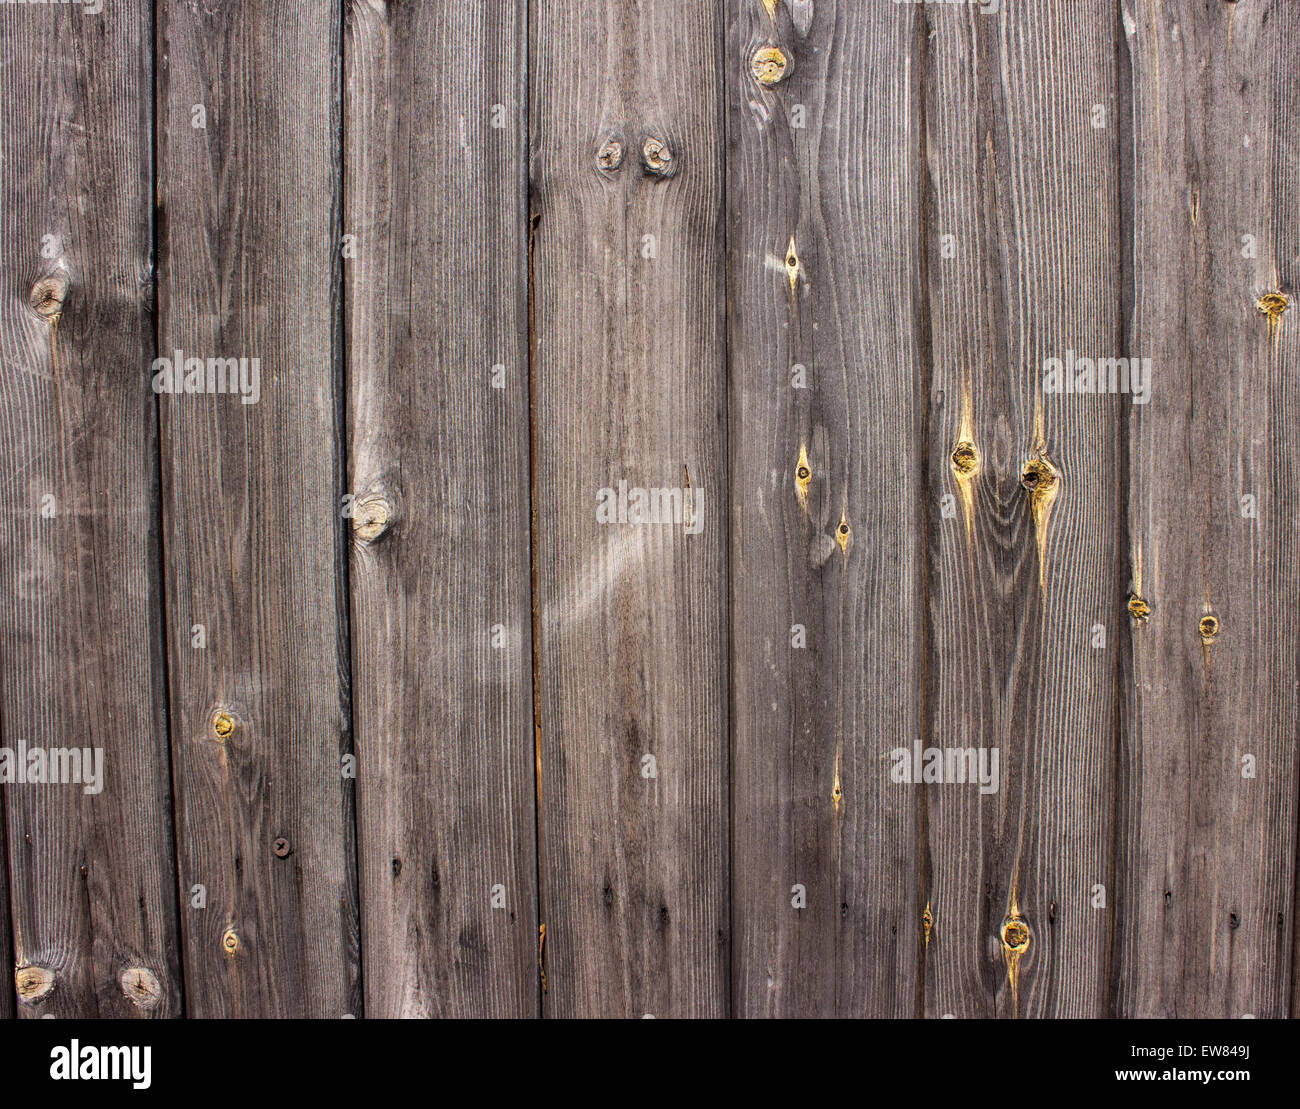 close up of old wooden slats Stock Photo